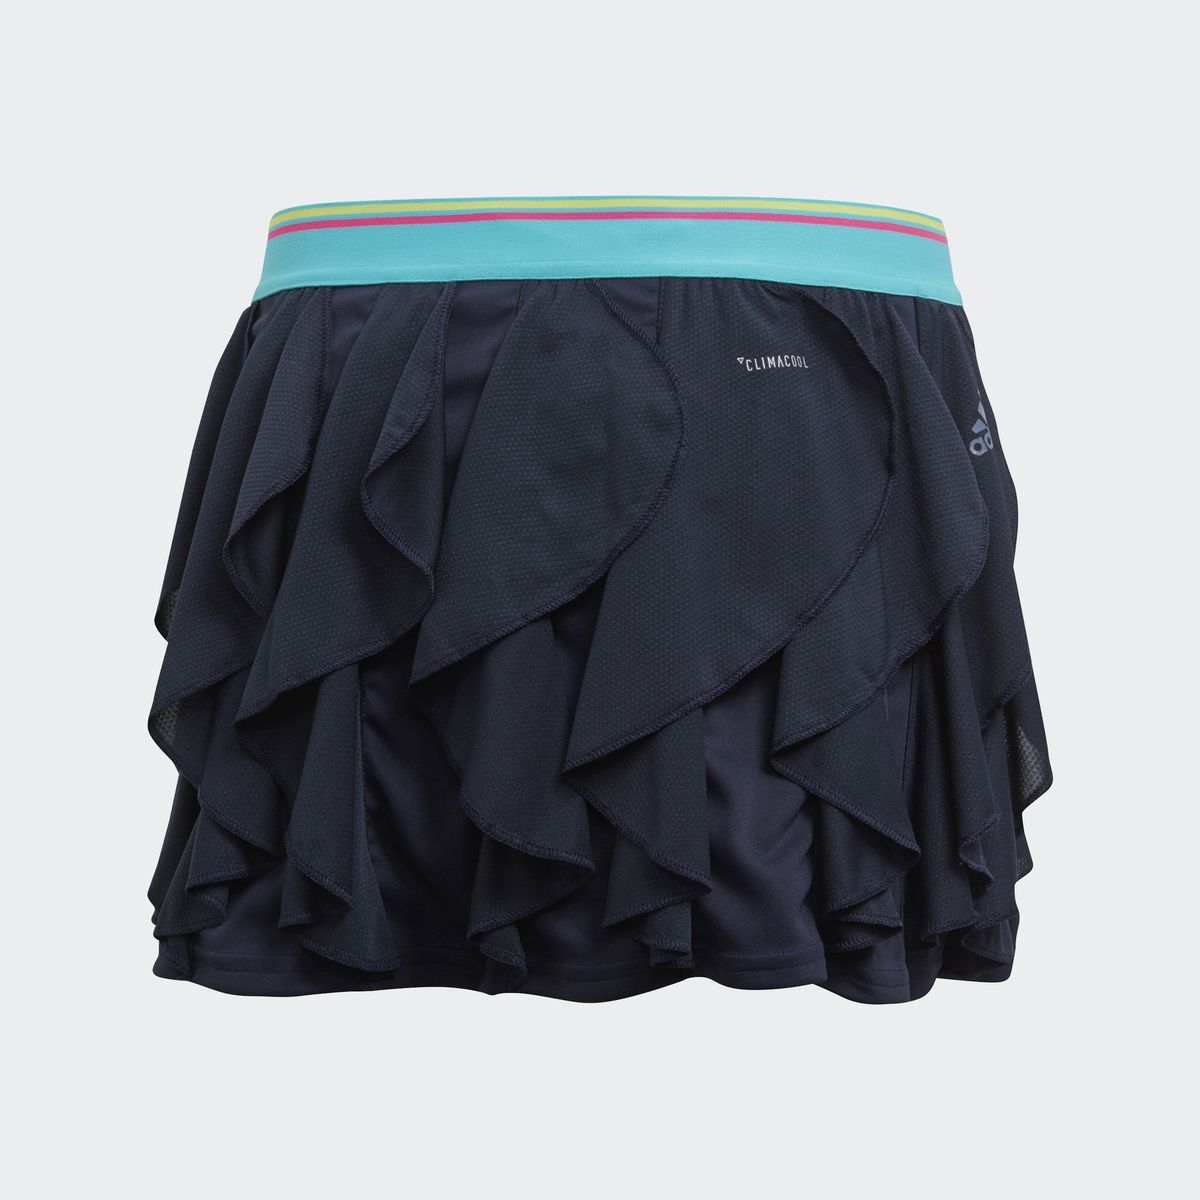    Adidas G Frilly Skirt, : . DH2807.  152